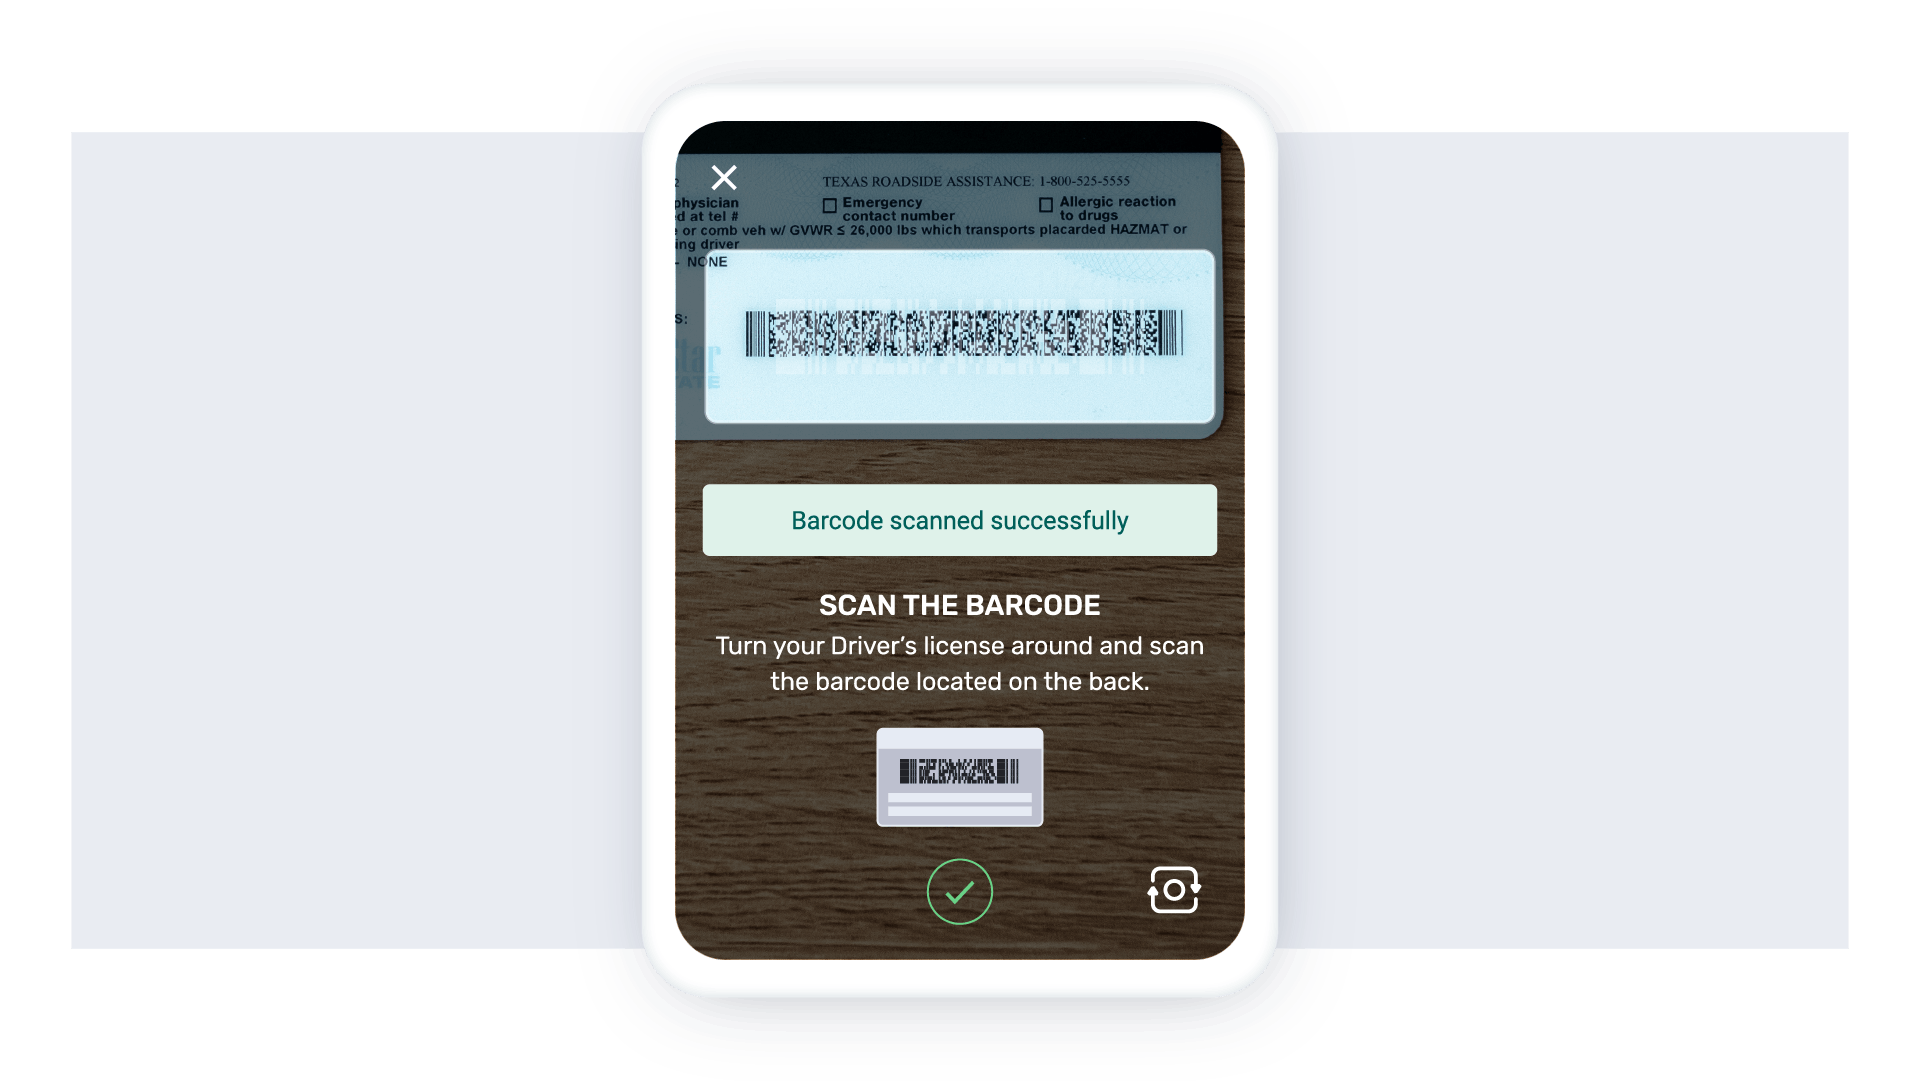 Veriff's Barcode Scanning Feature